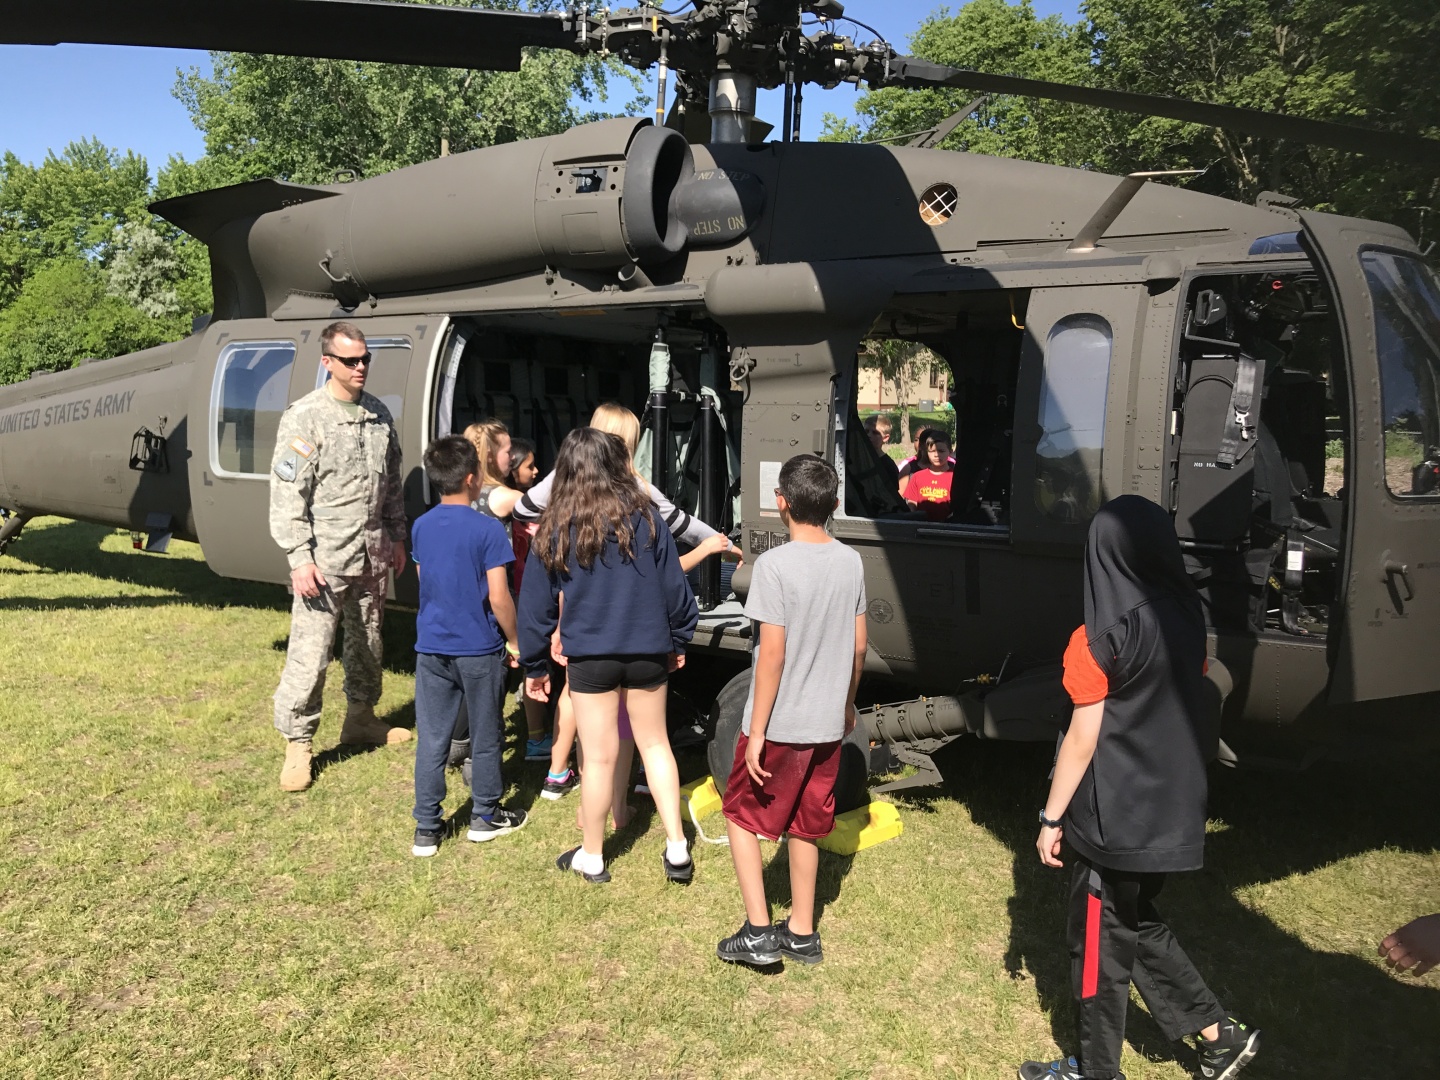 Black Hawk lands at Mitchell School to spur STEM learning